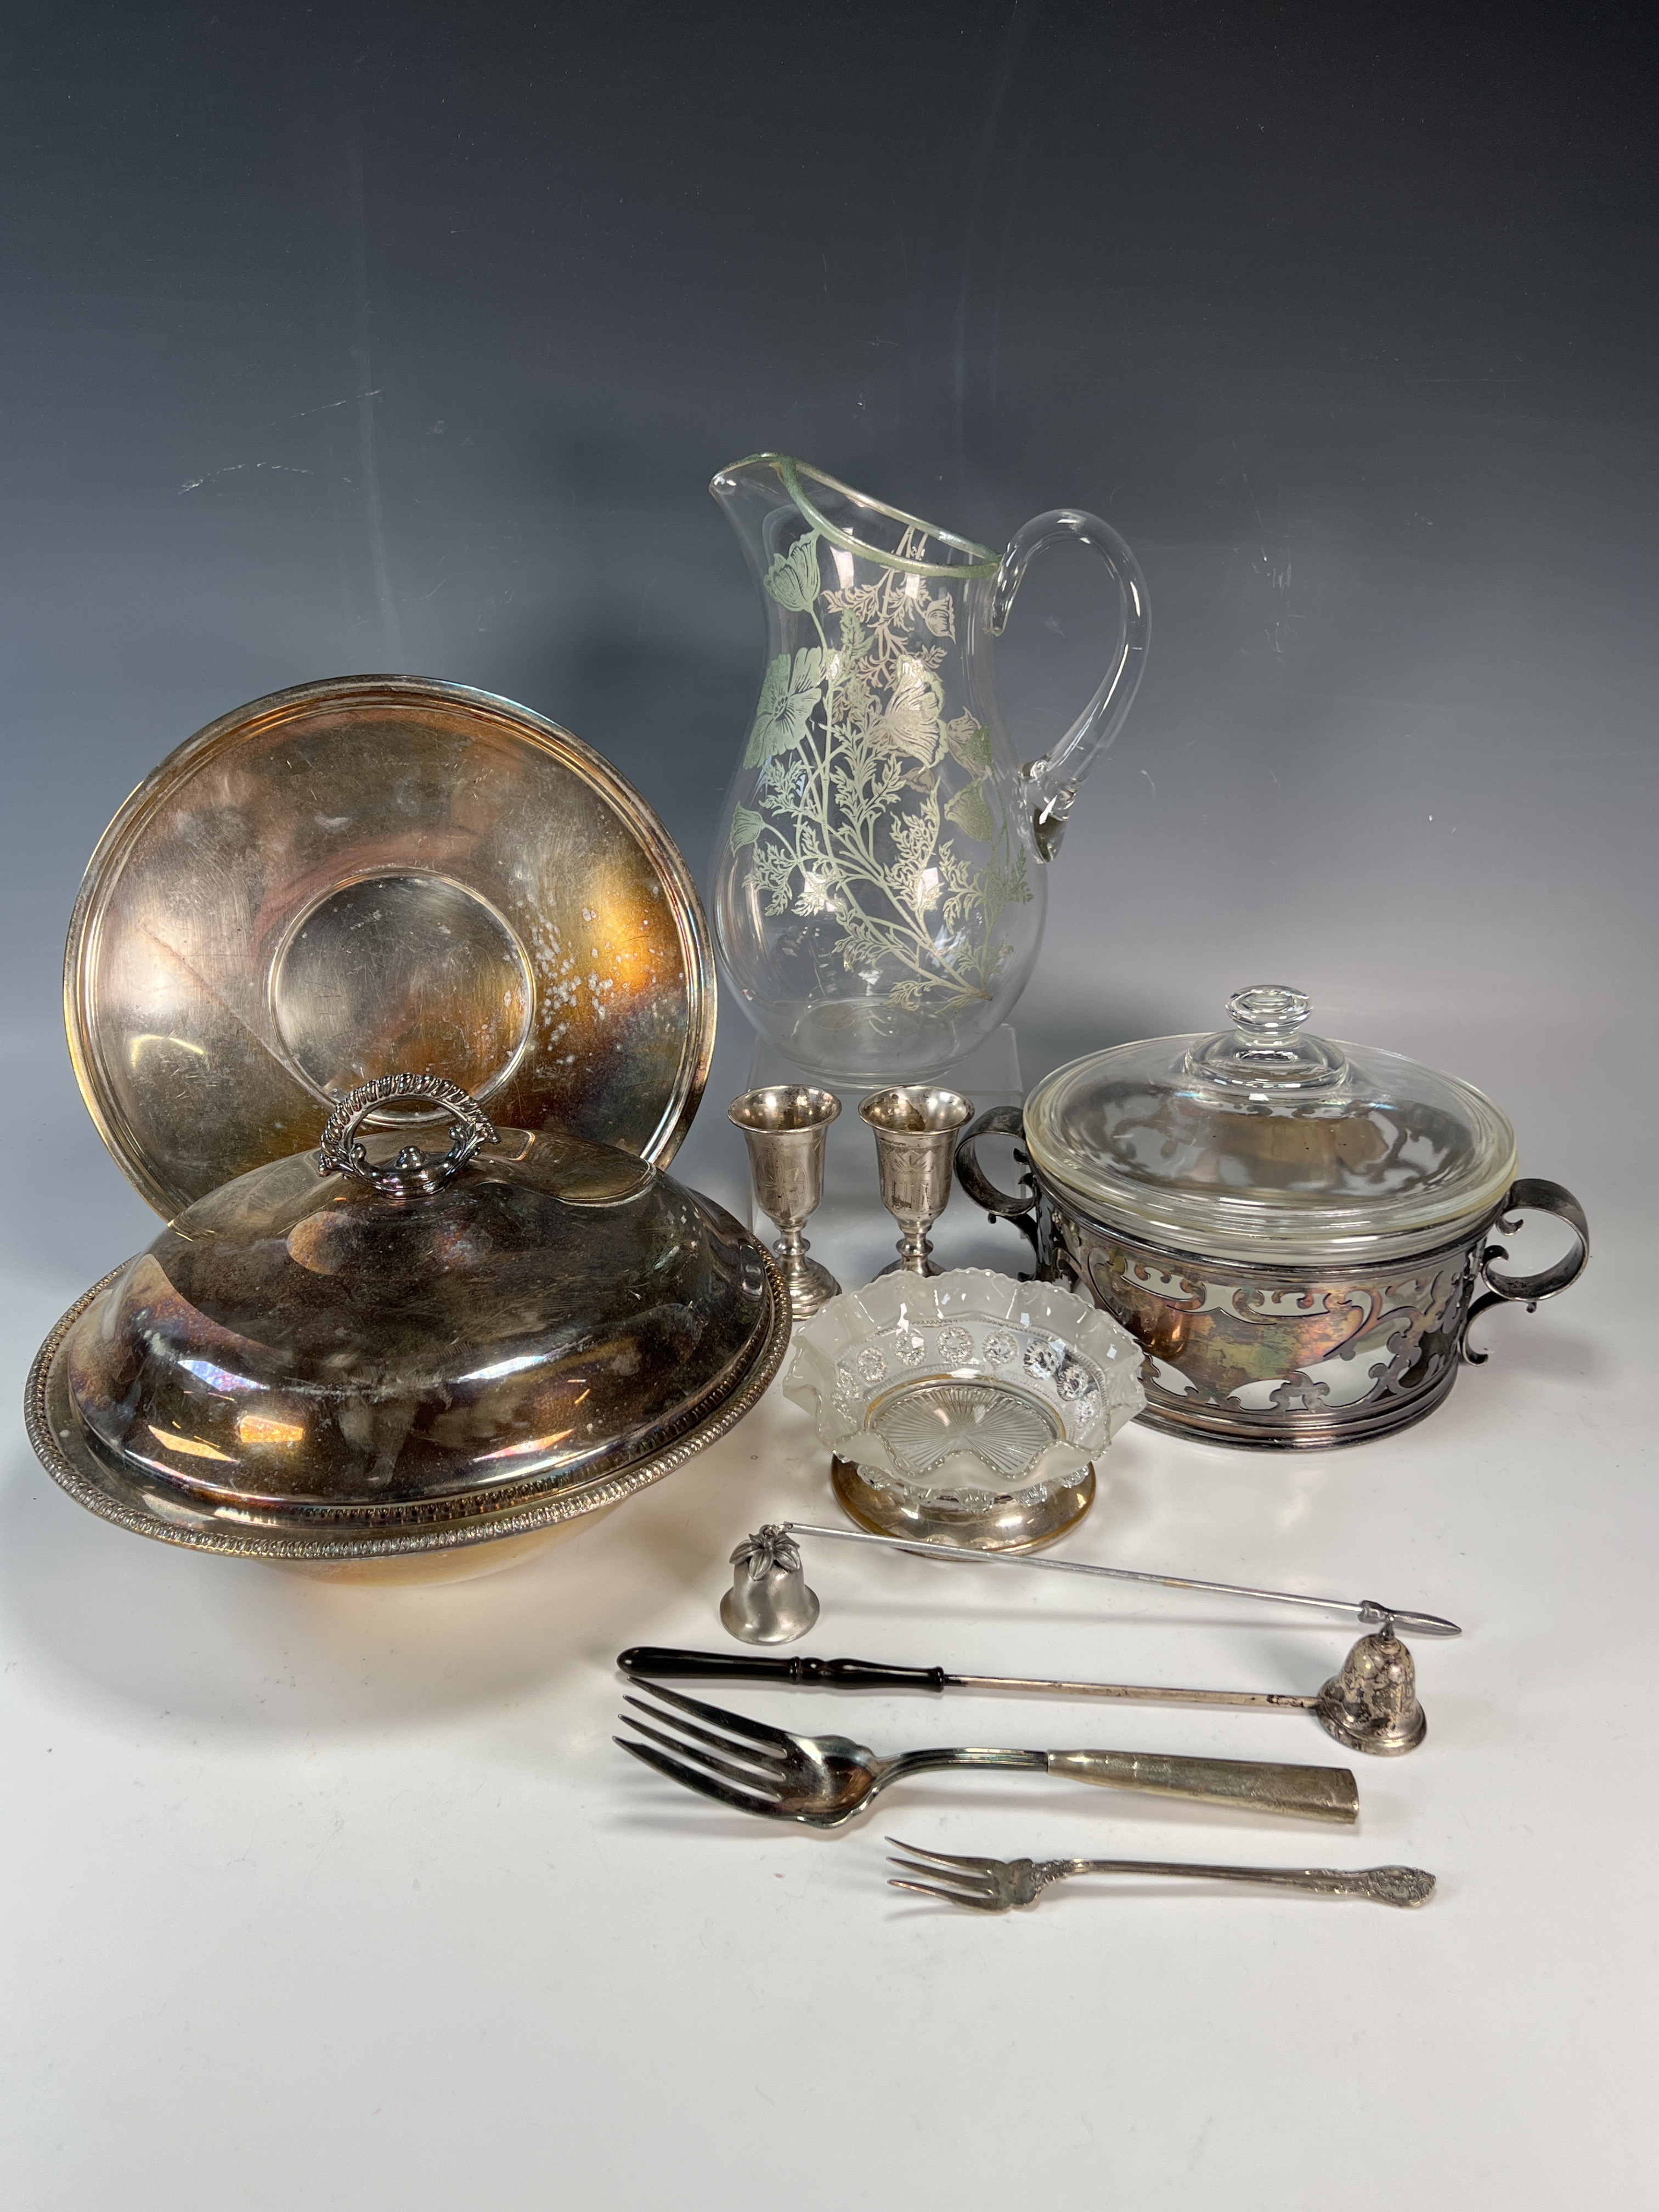 Silverplate & Glass Serving Pieces, 2 Sterling Forks Gorham image 1